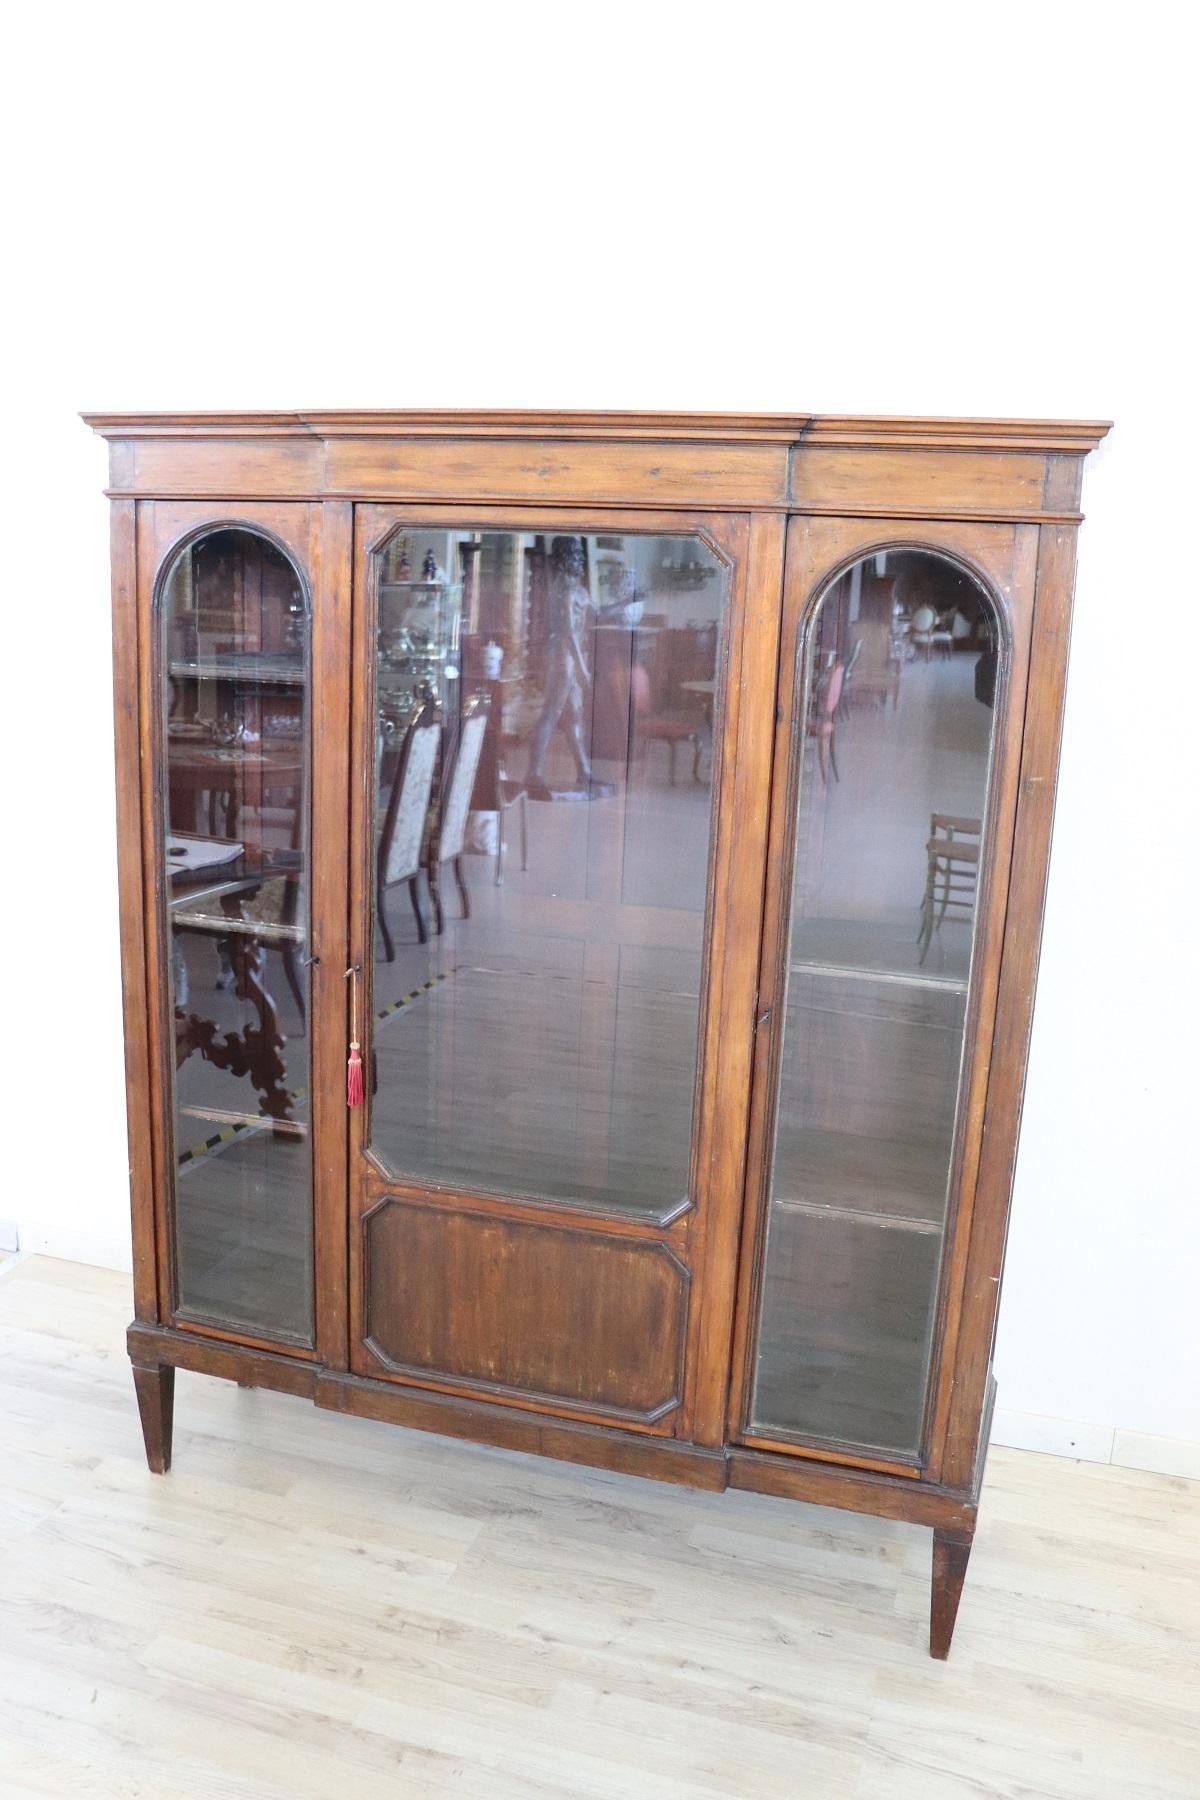 Italian vitrine or bookcase about 1930s high quality furniture.
Vitrine in poplar wood the line is very simple and linear. On the front three glass doors ideal for storing precious objects or your books. The distance of the internal shelves can be